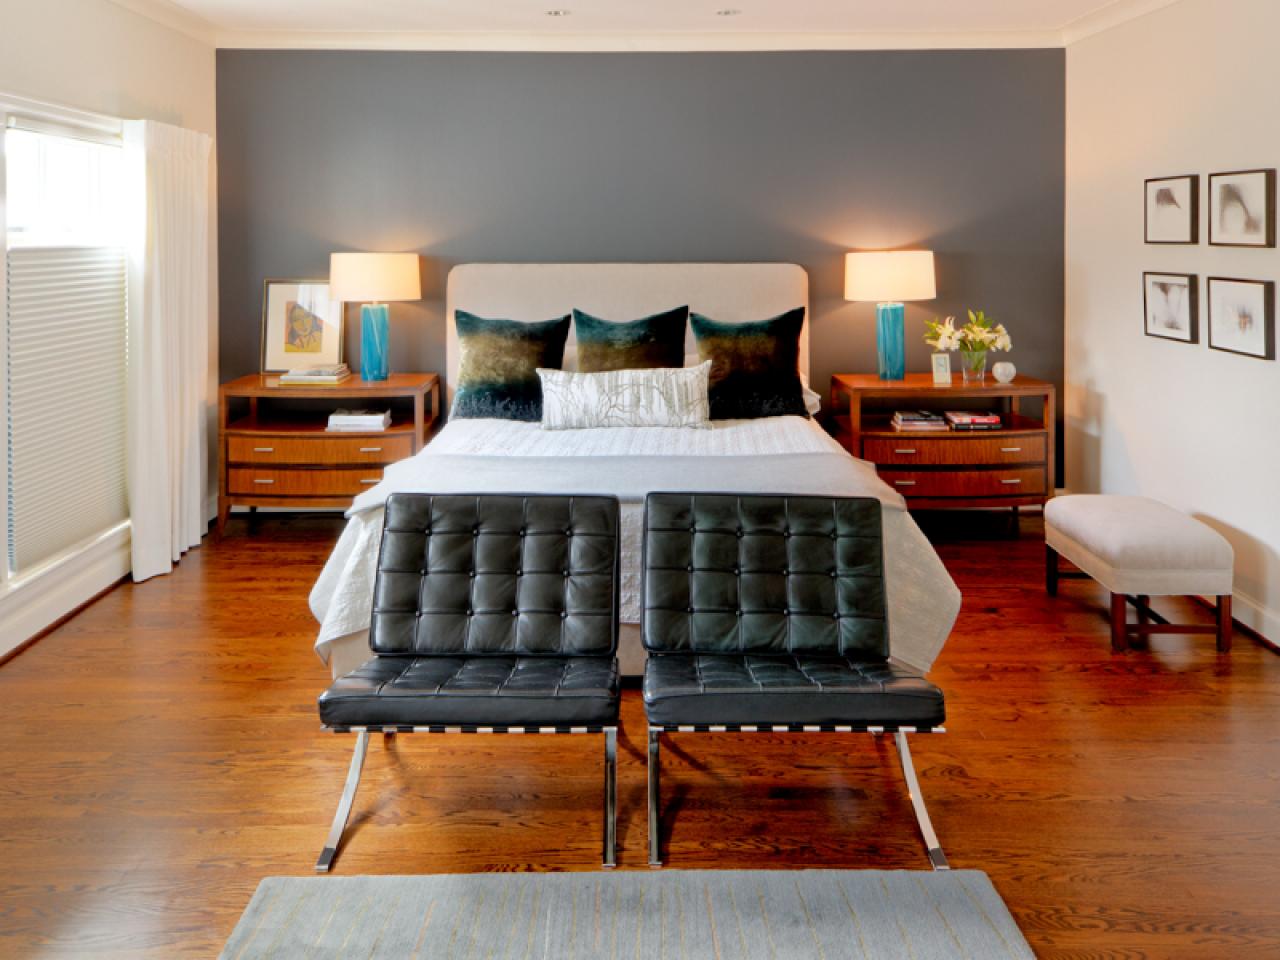 Leather is a wonderful dust-free option in the bedroom